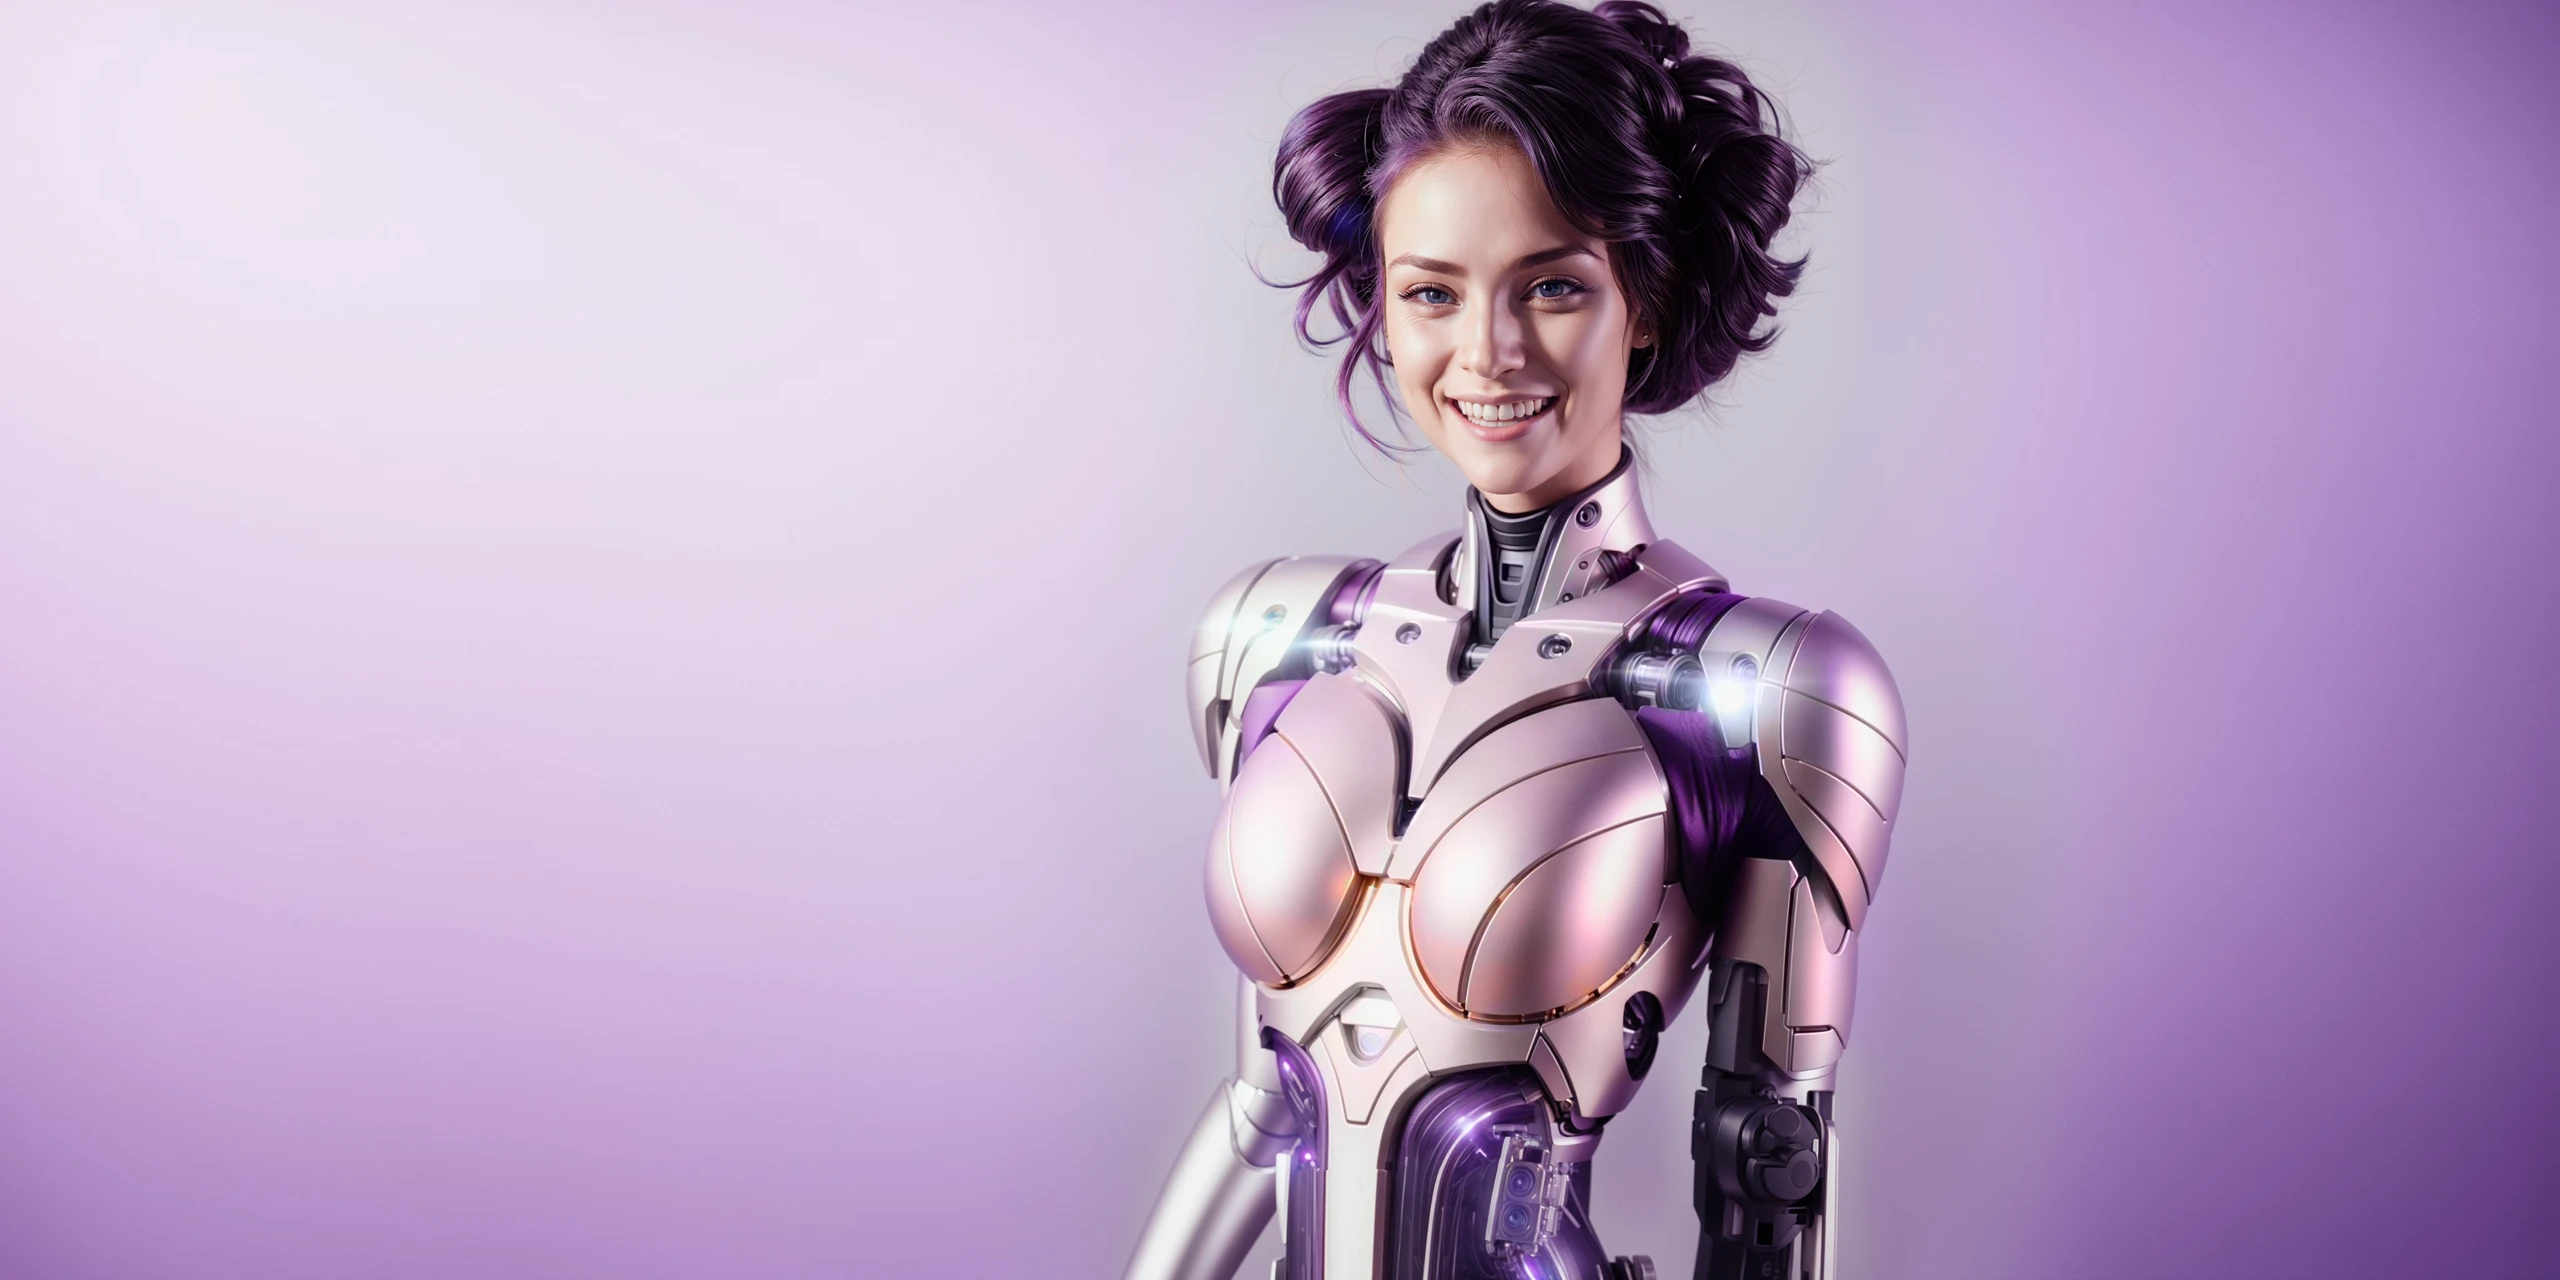 A female storyteller, android, biomechanical, cyborg, with a smile on her face and arms, standing in front of a purple background, cybernetics